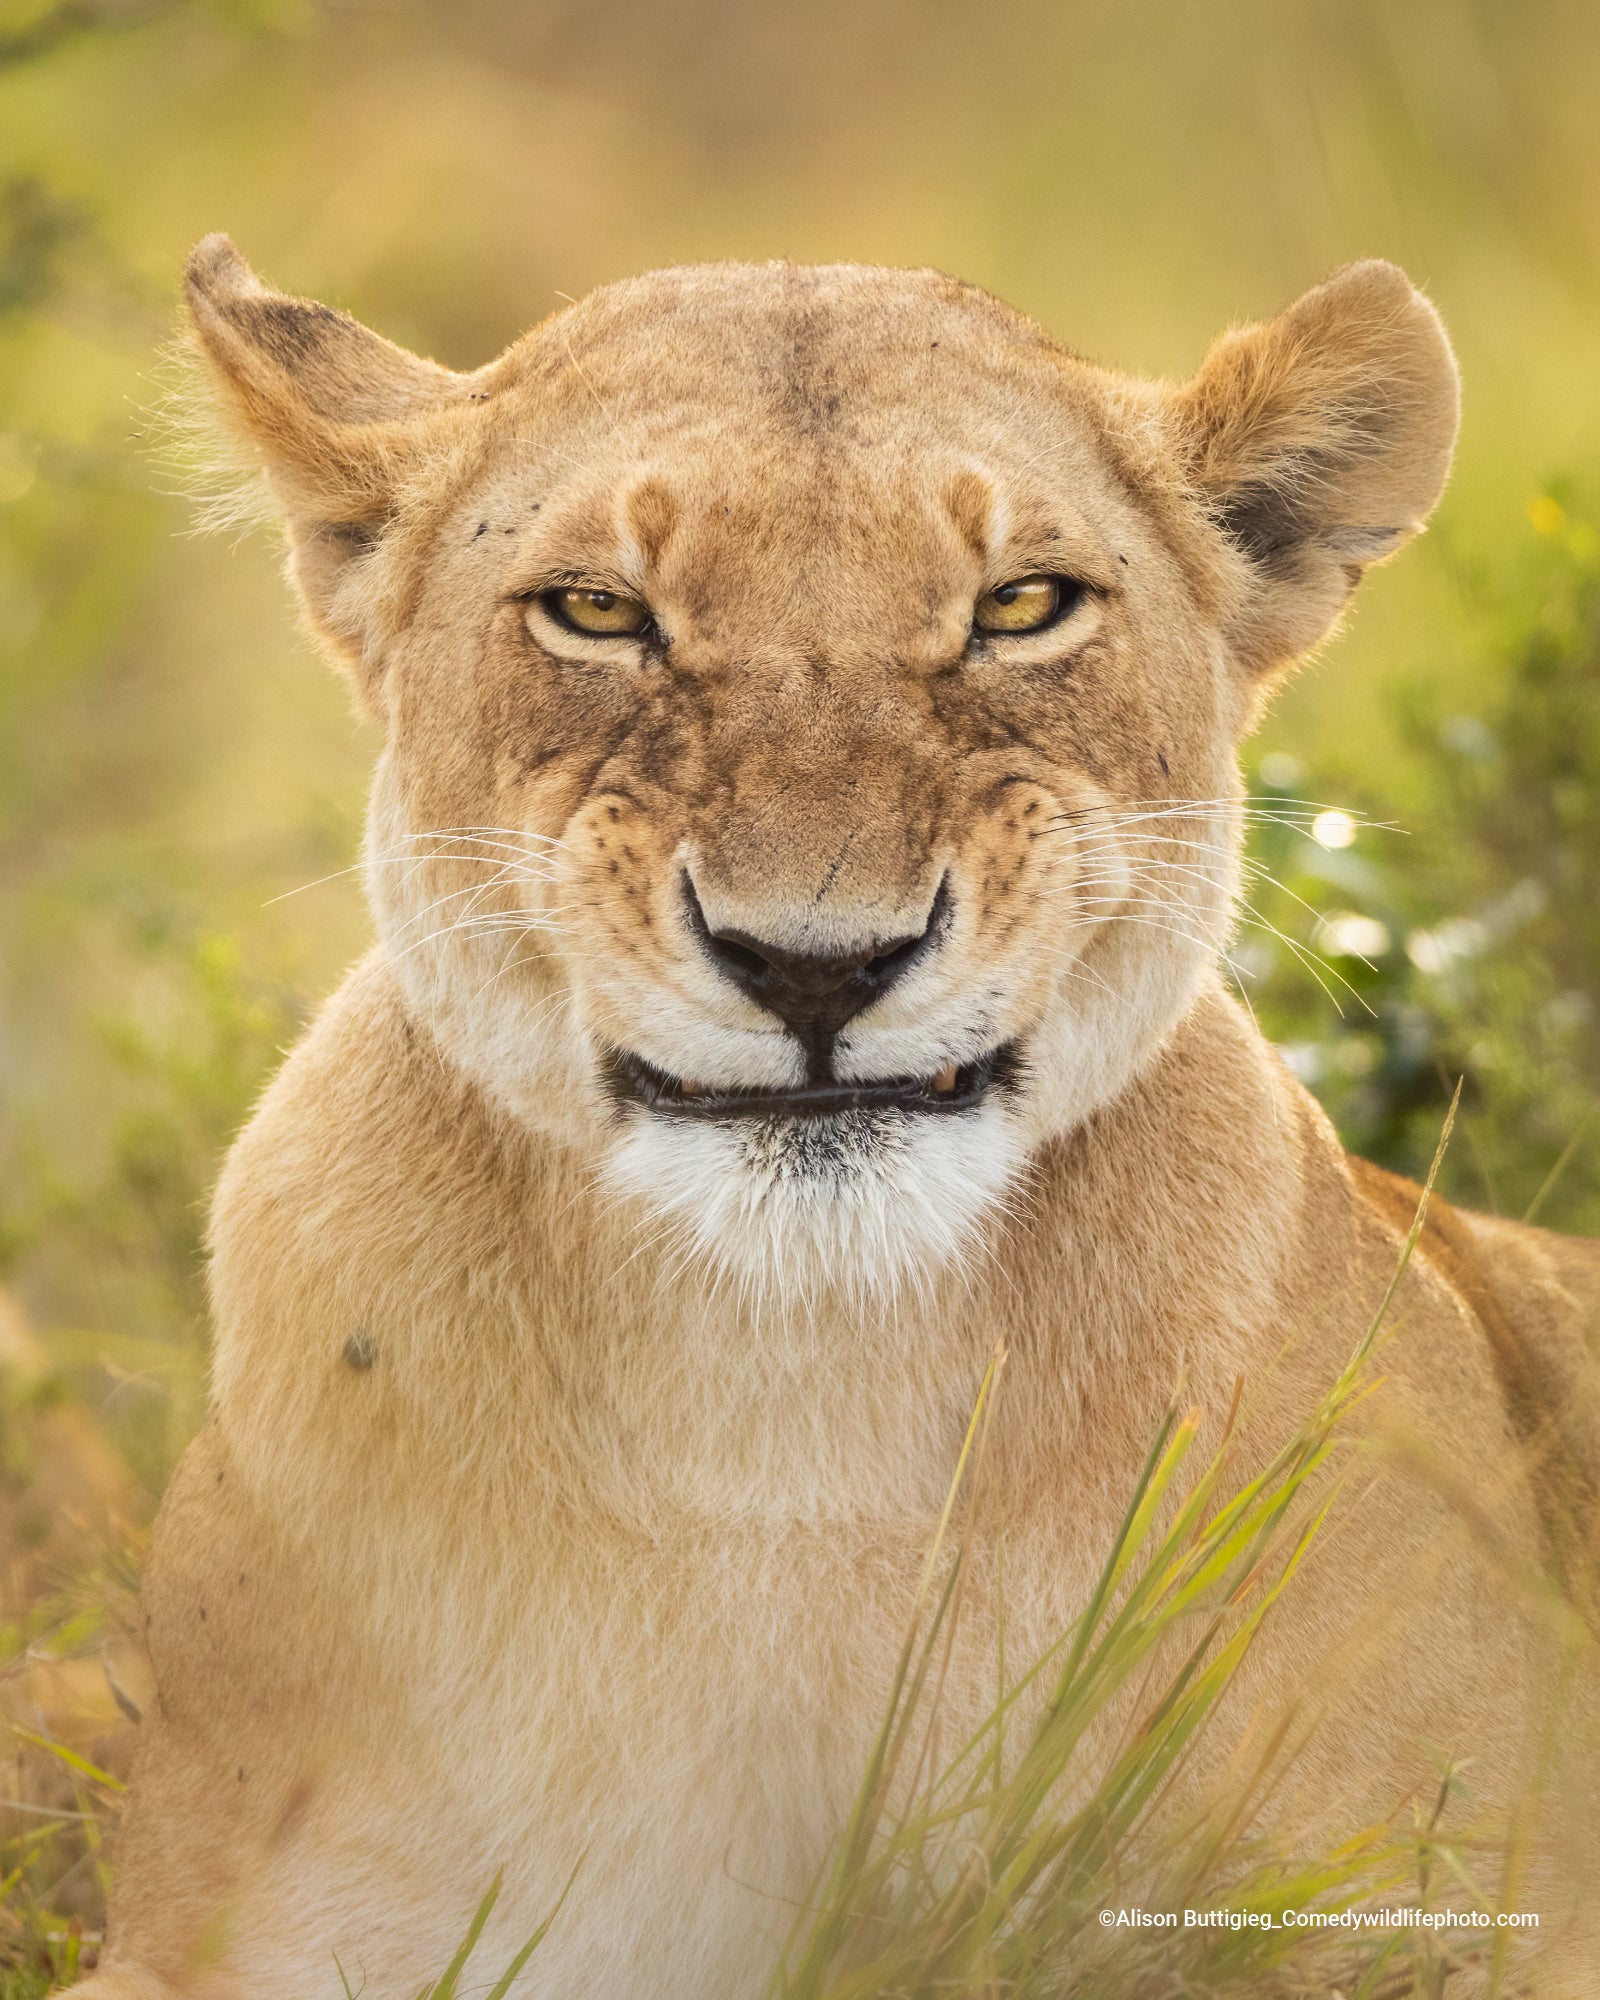 A lioness appears to grimace in this shot. (Photo: ©  Alison Buttigieg / Comedywildlifephoto.com.)